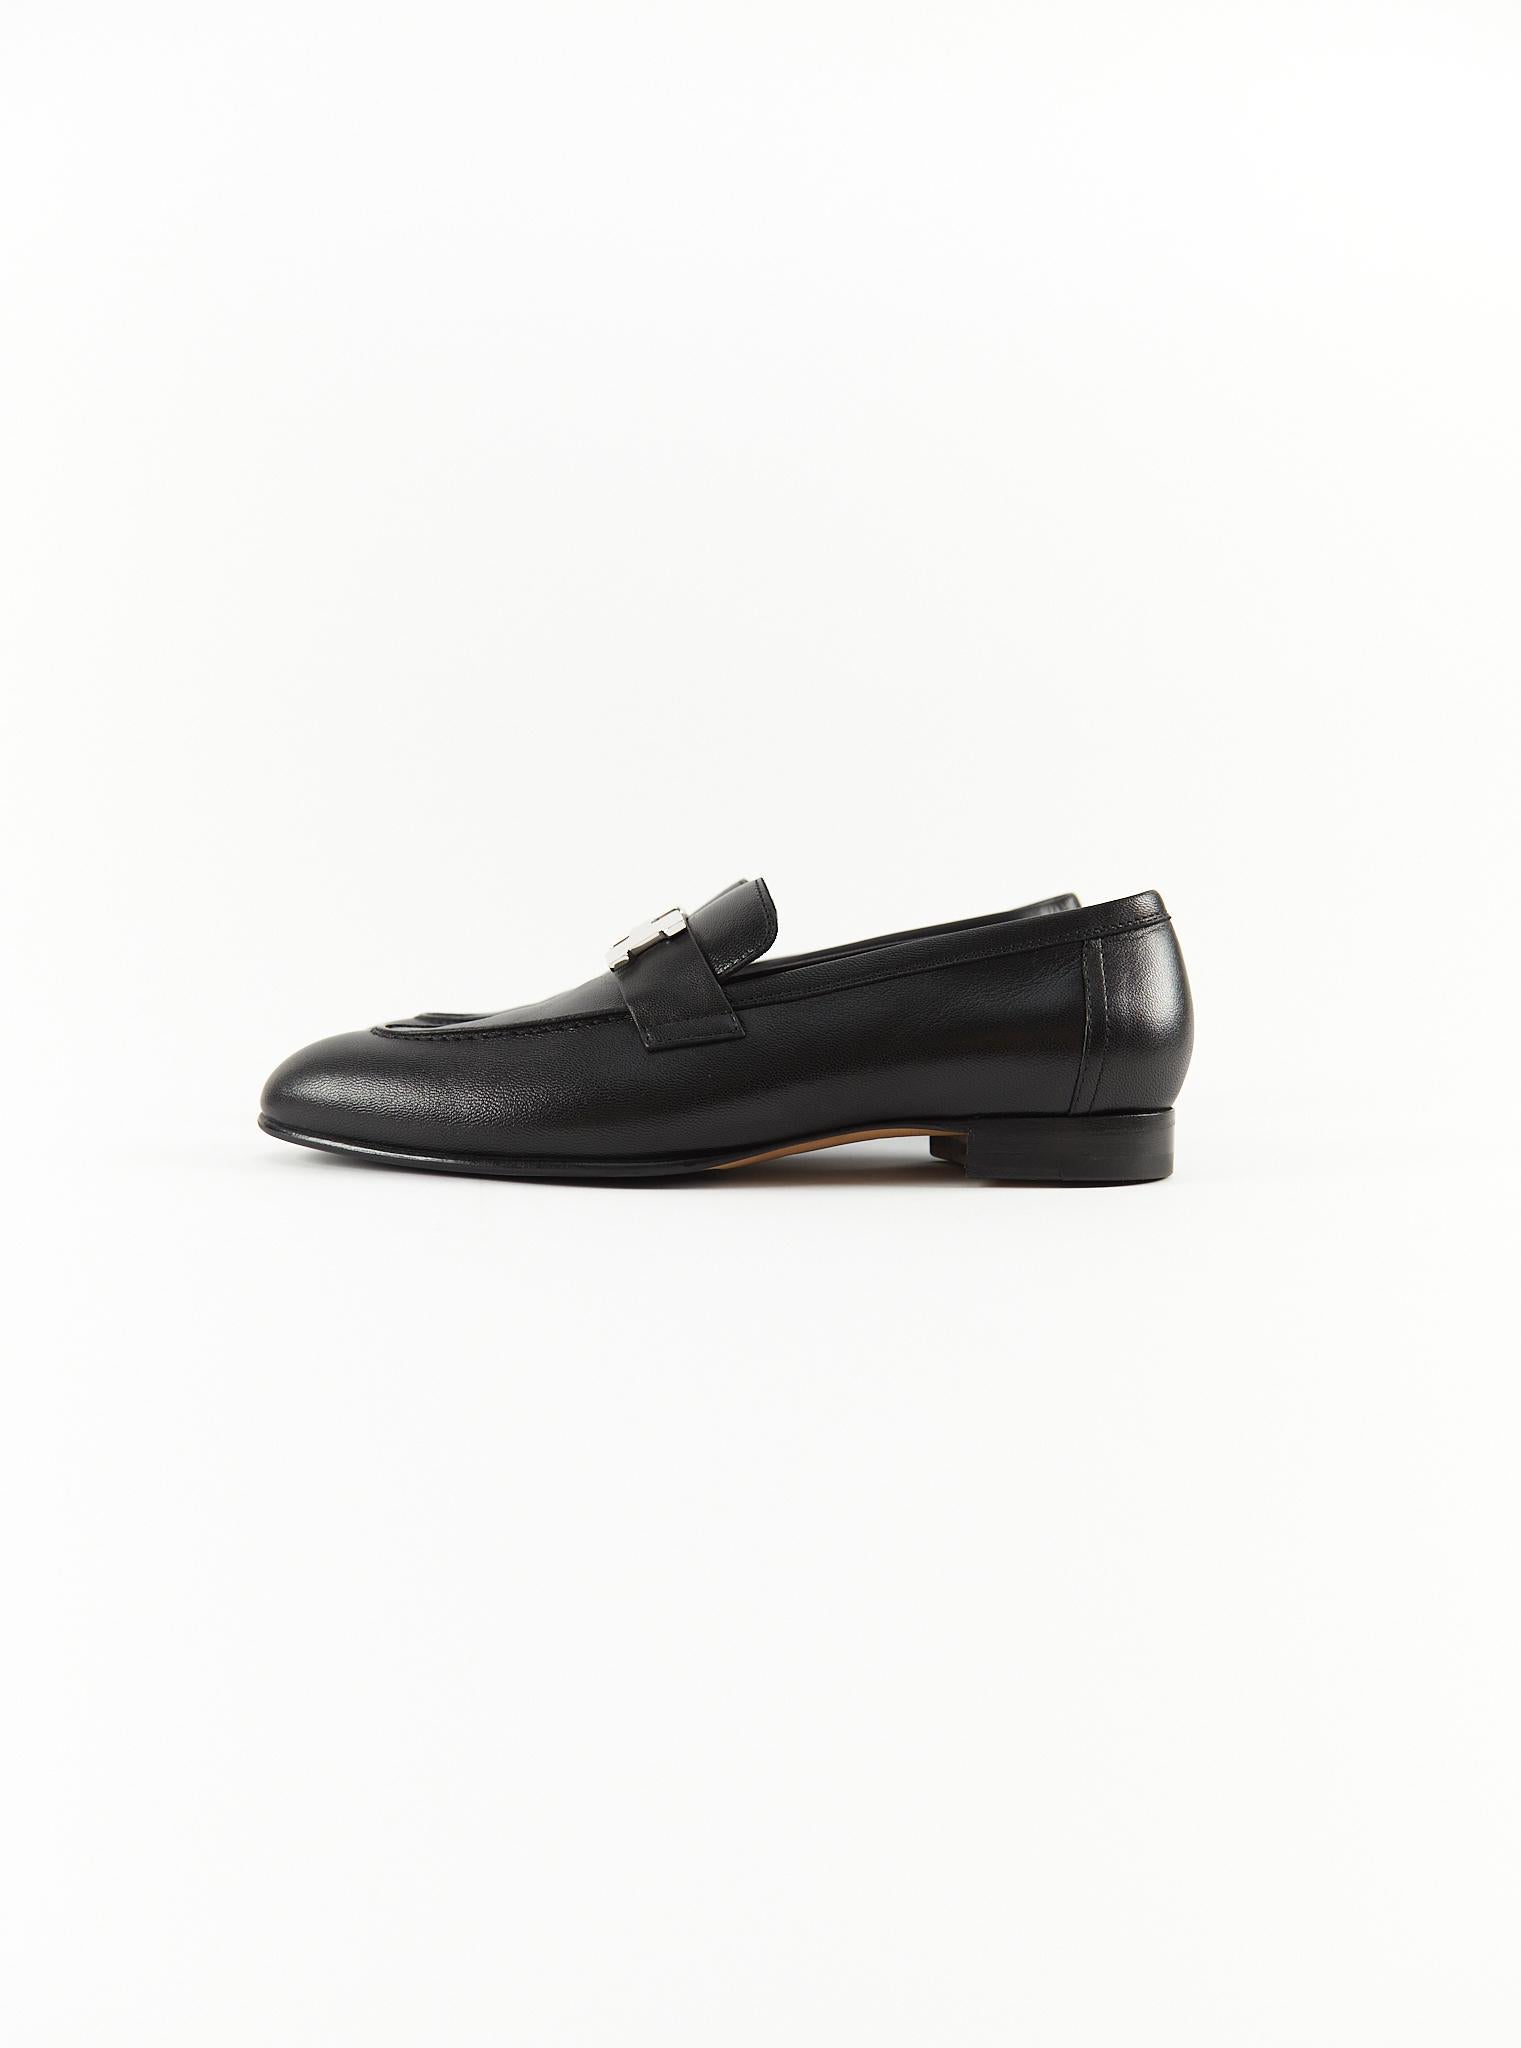 HERMÈS PARIS LOAFERS Black - Size 37.5 In Excellent Condition For Sale In London, GB